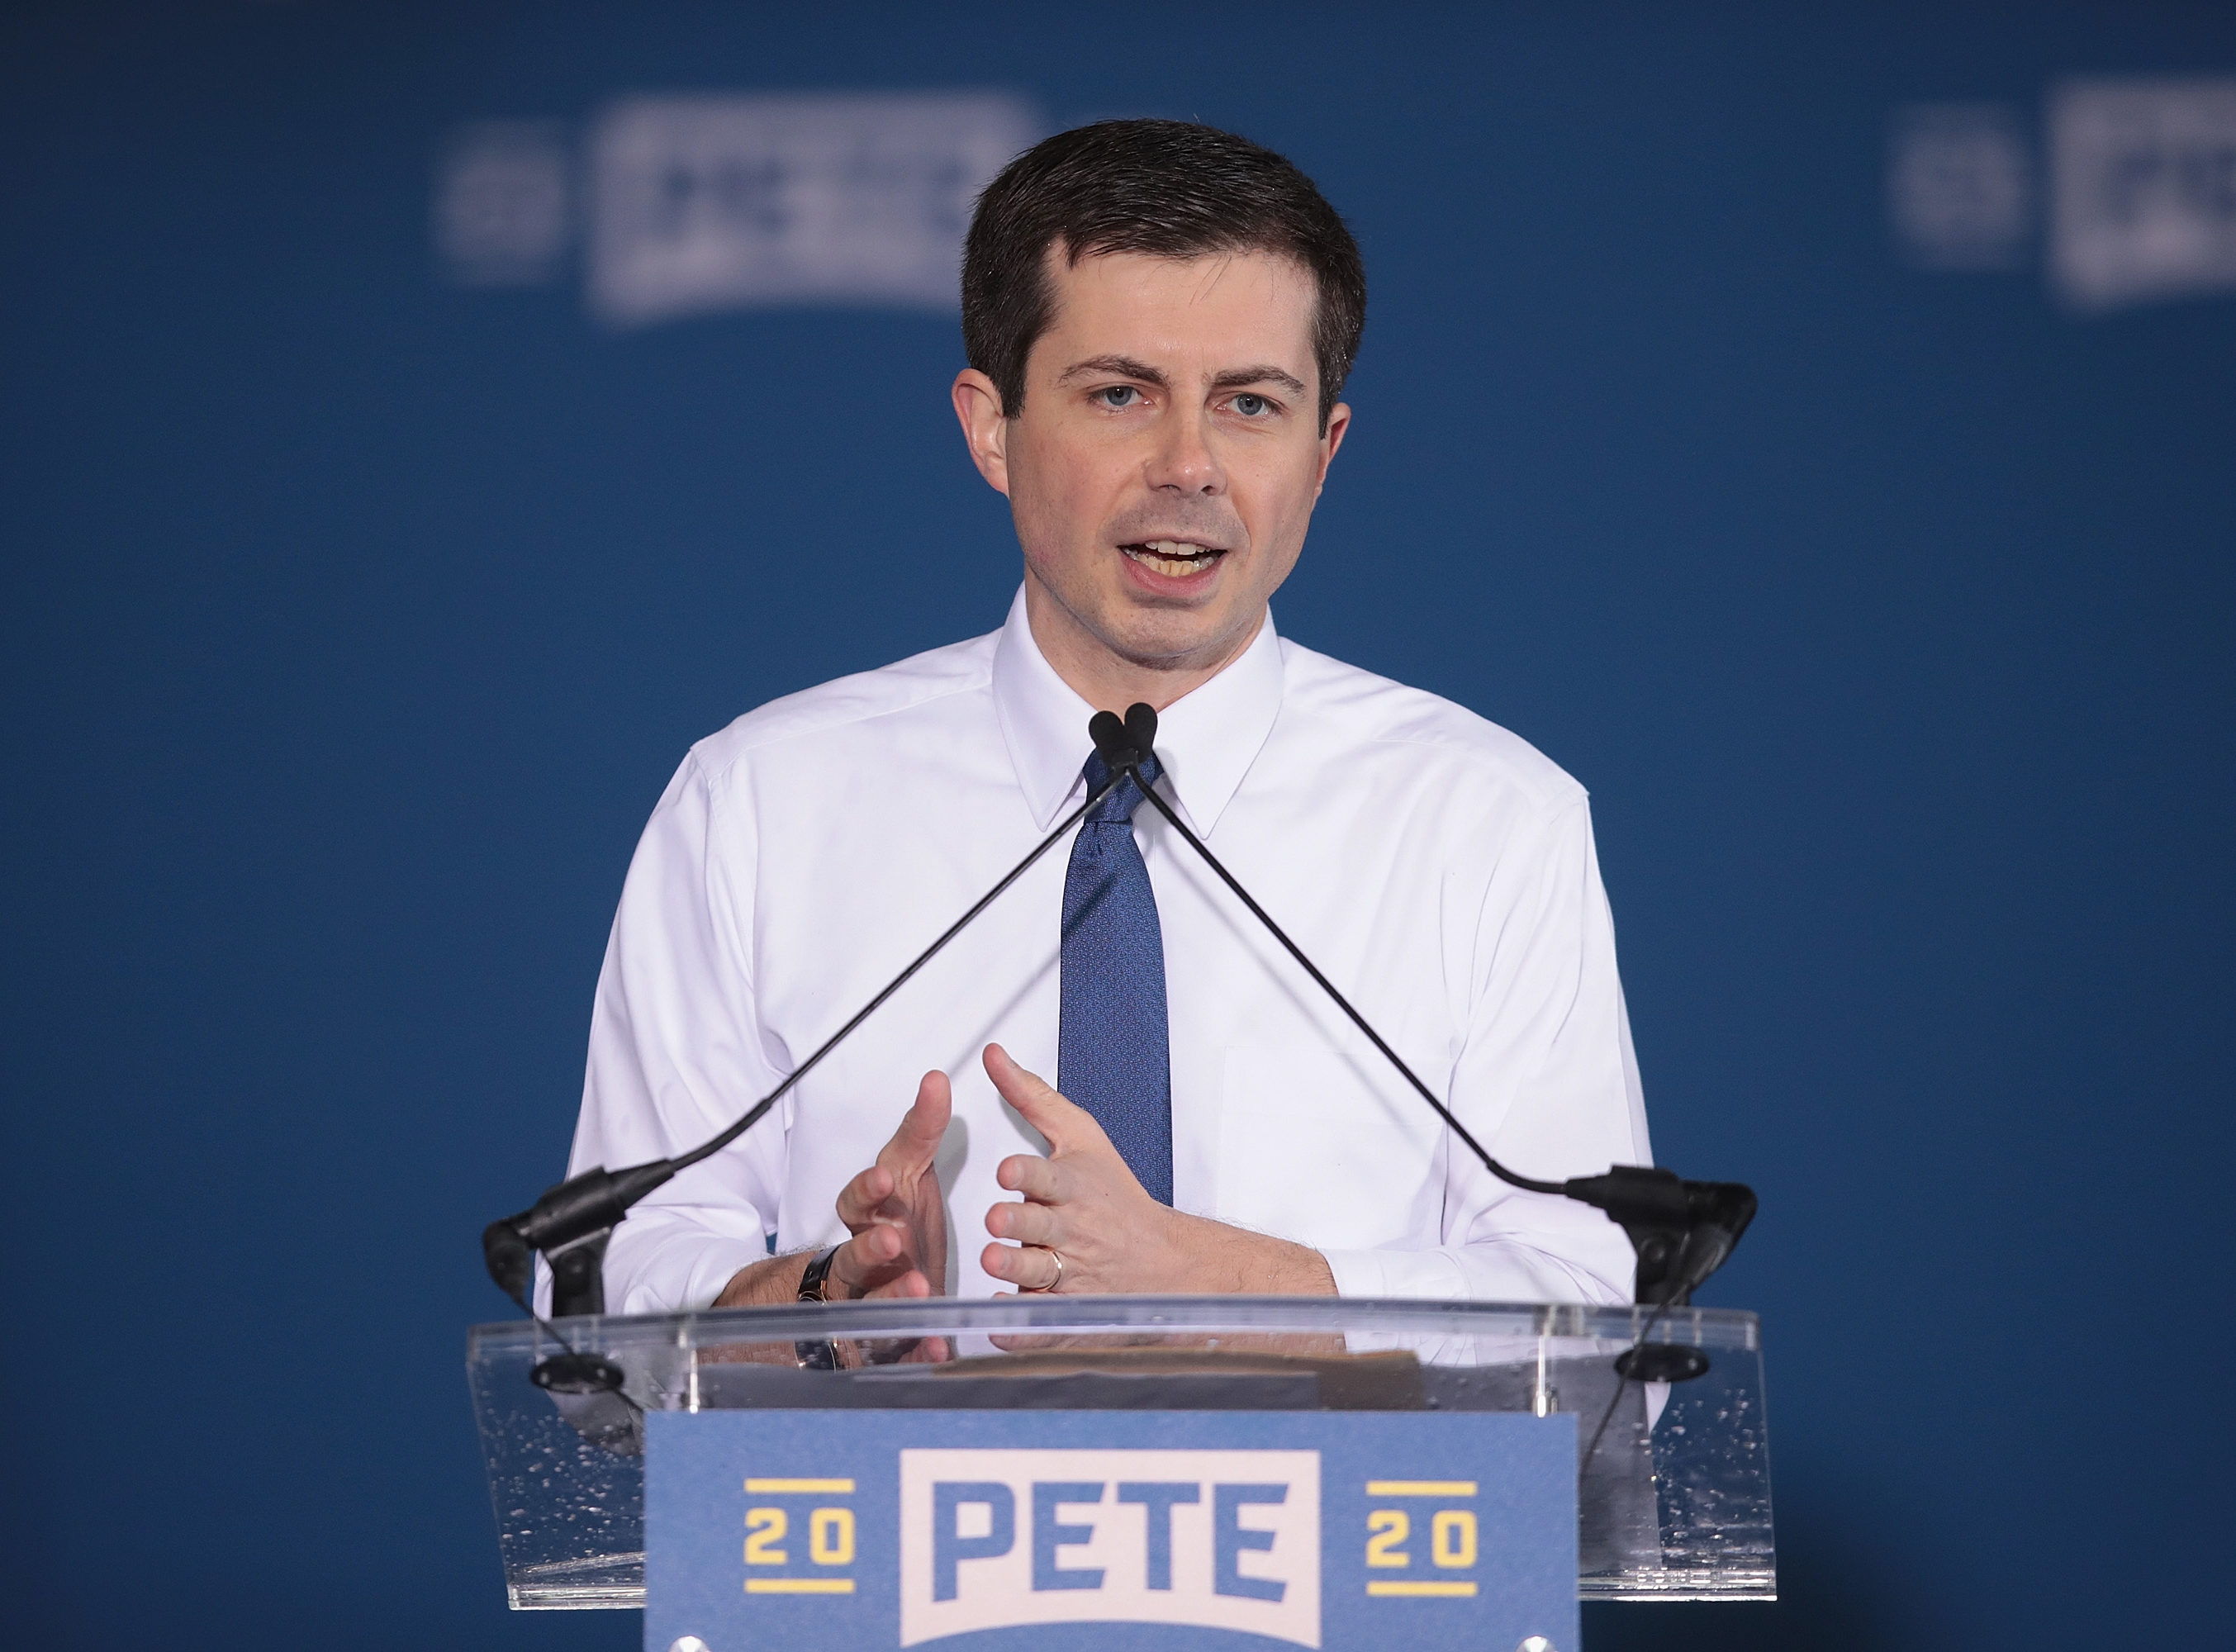 SOUTH BEND, INDIANA - APRIL 14: South Bend Mayor Pete Buttigieg announces that he will be seeking the Democratic nomination for president during a rally in the old Studebaker car factory on April 14, 2019 in South Bend, Indiana. Buttigieg has been drumming up support for his run during several recent campaign swings through Iowa, where he will be retuning to continue his campaign later this week. (Photo by Scott Olson/Getty Images)